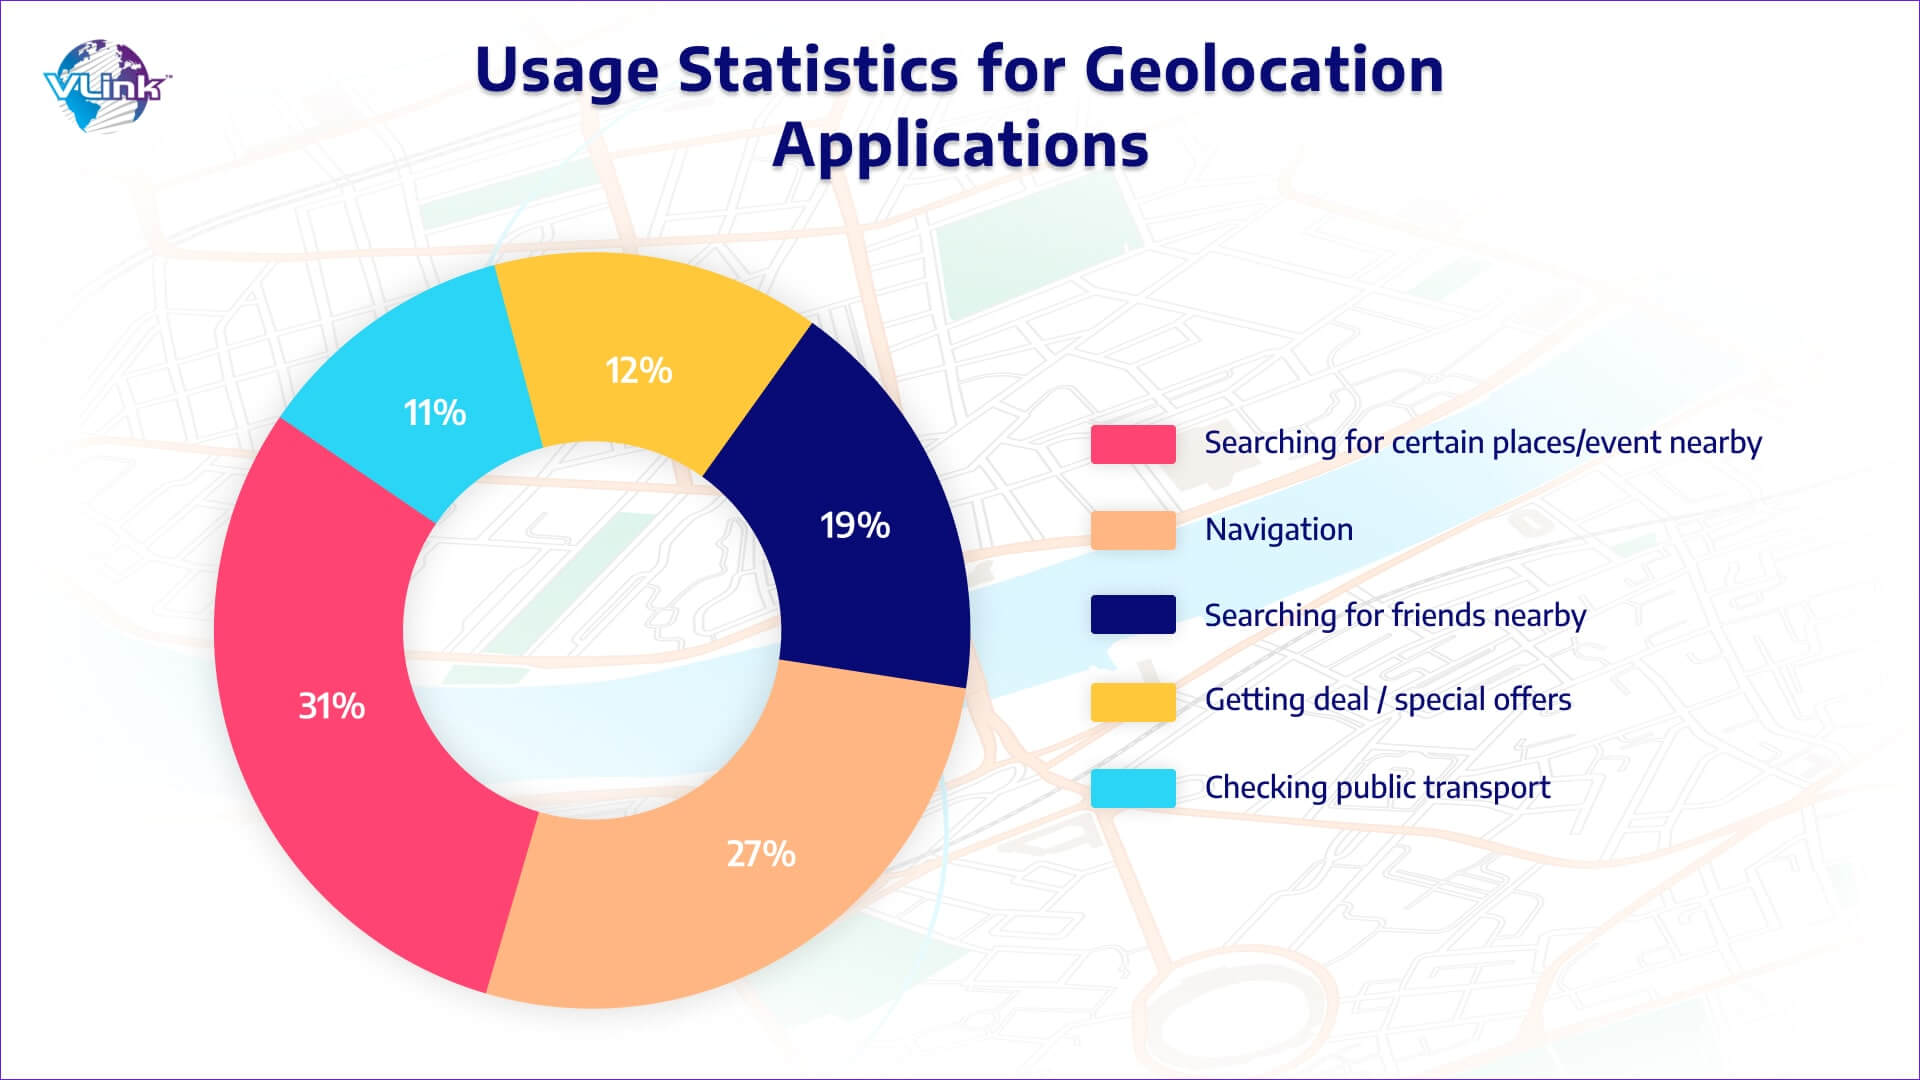 usages of geolocation apps